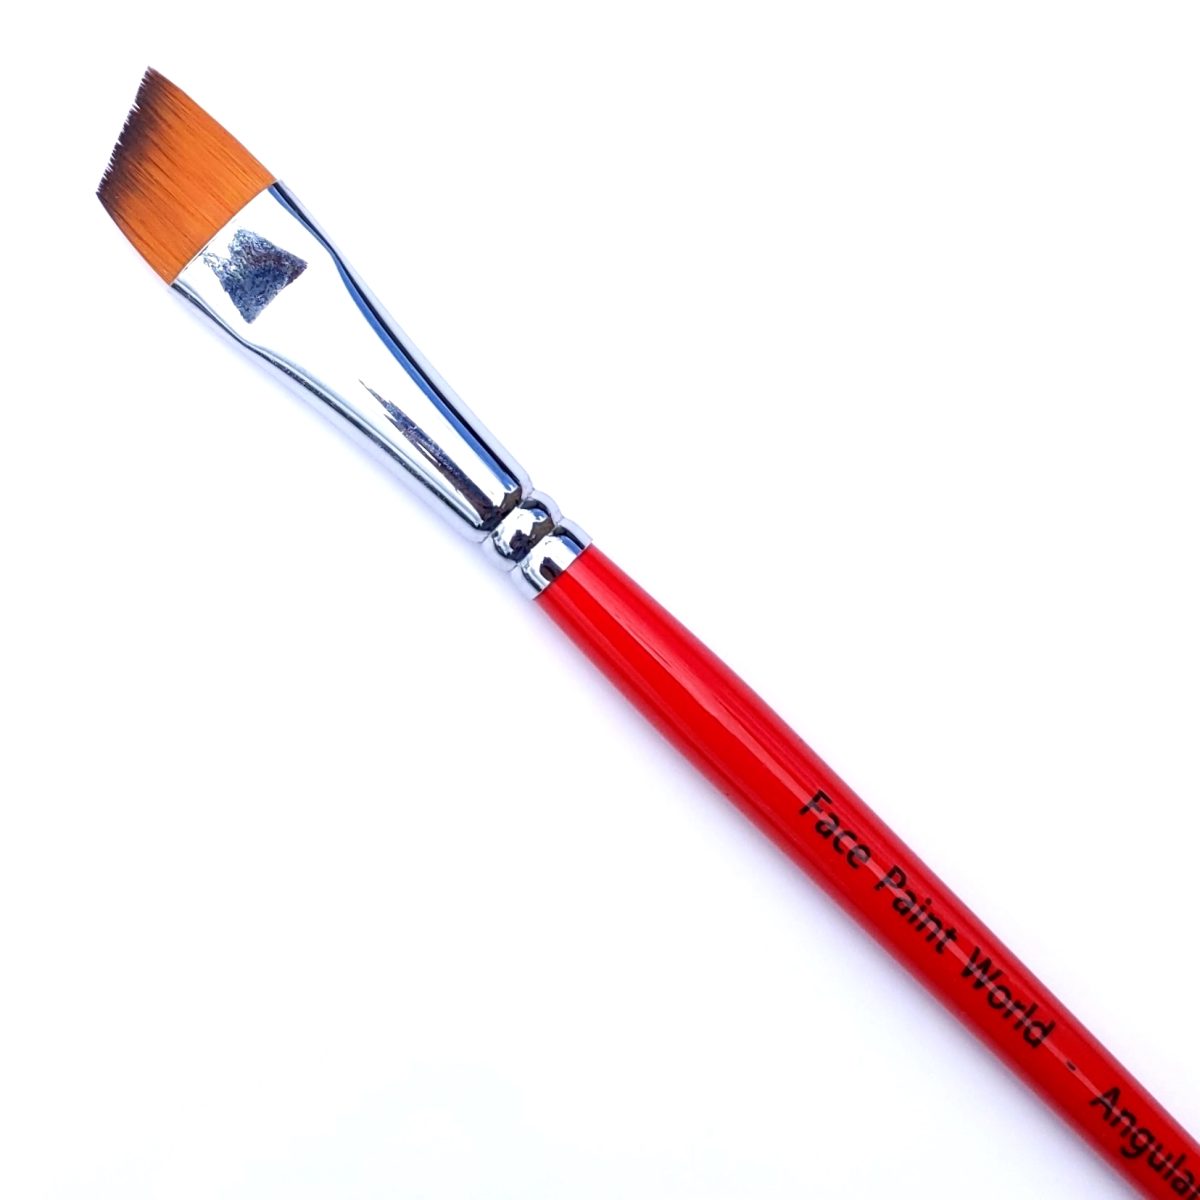 ANGULAR Brush 5 8th inch by Face Paint World